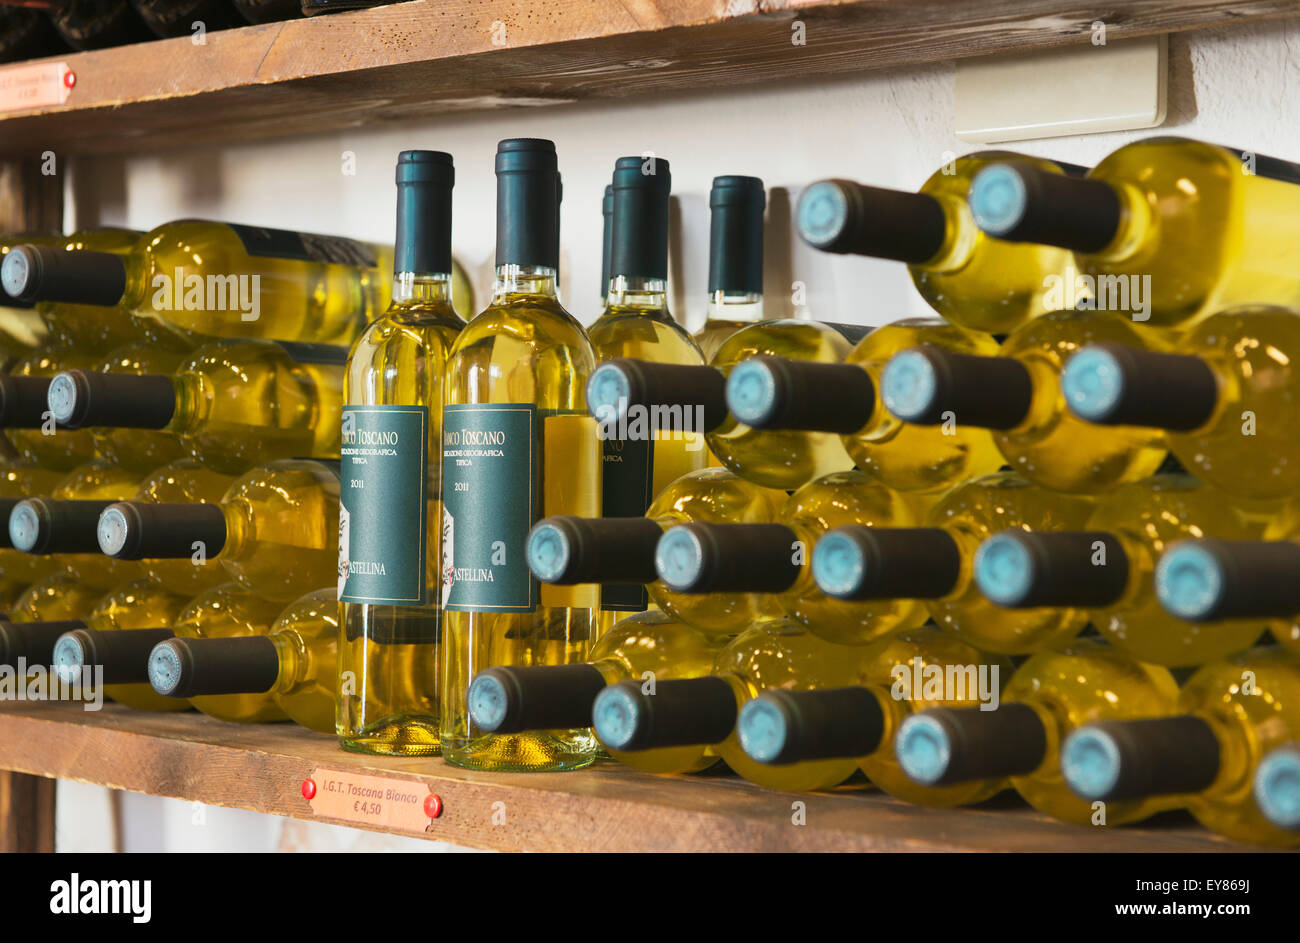 Wine bottles in a wine shop, Castellina in Chianti, Tuscany, Italy Stock Photo